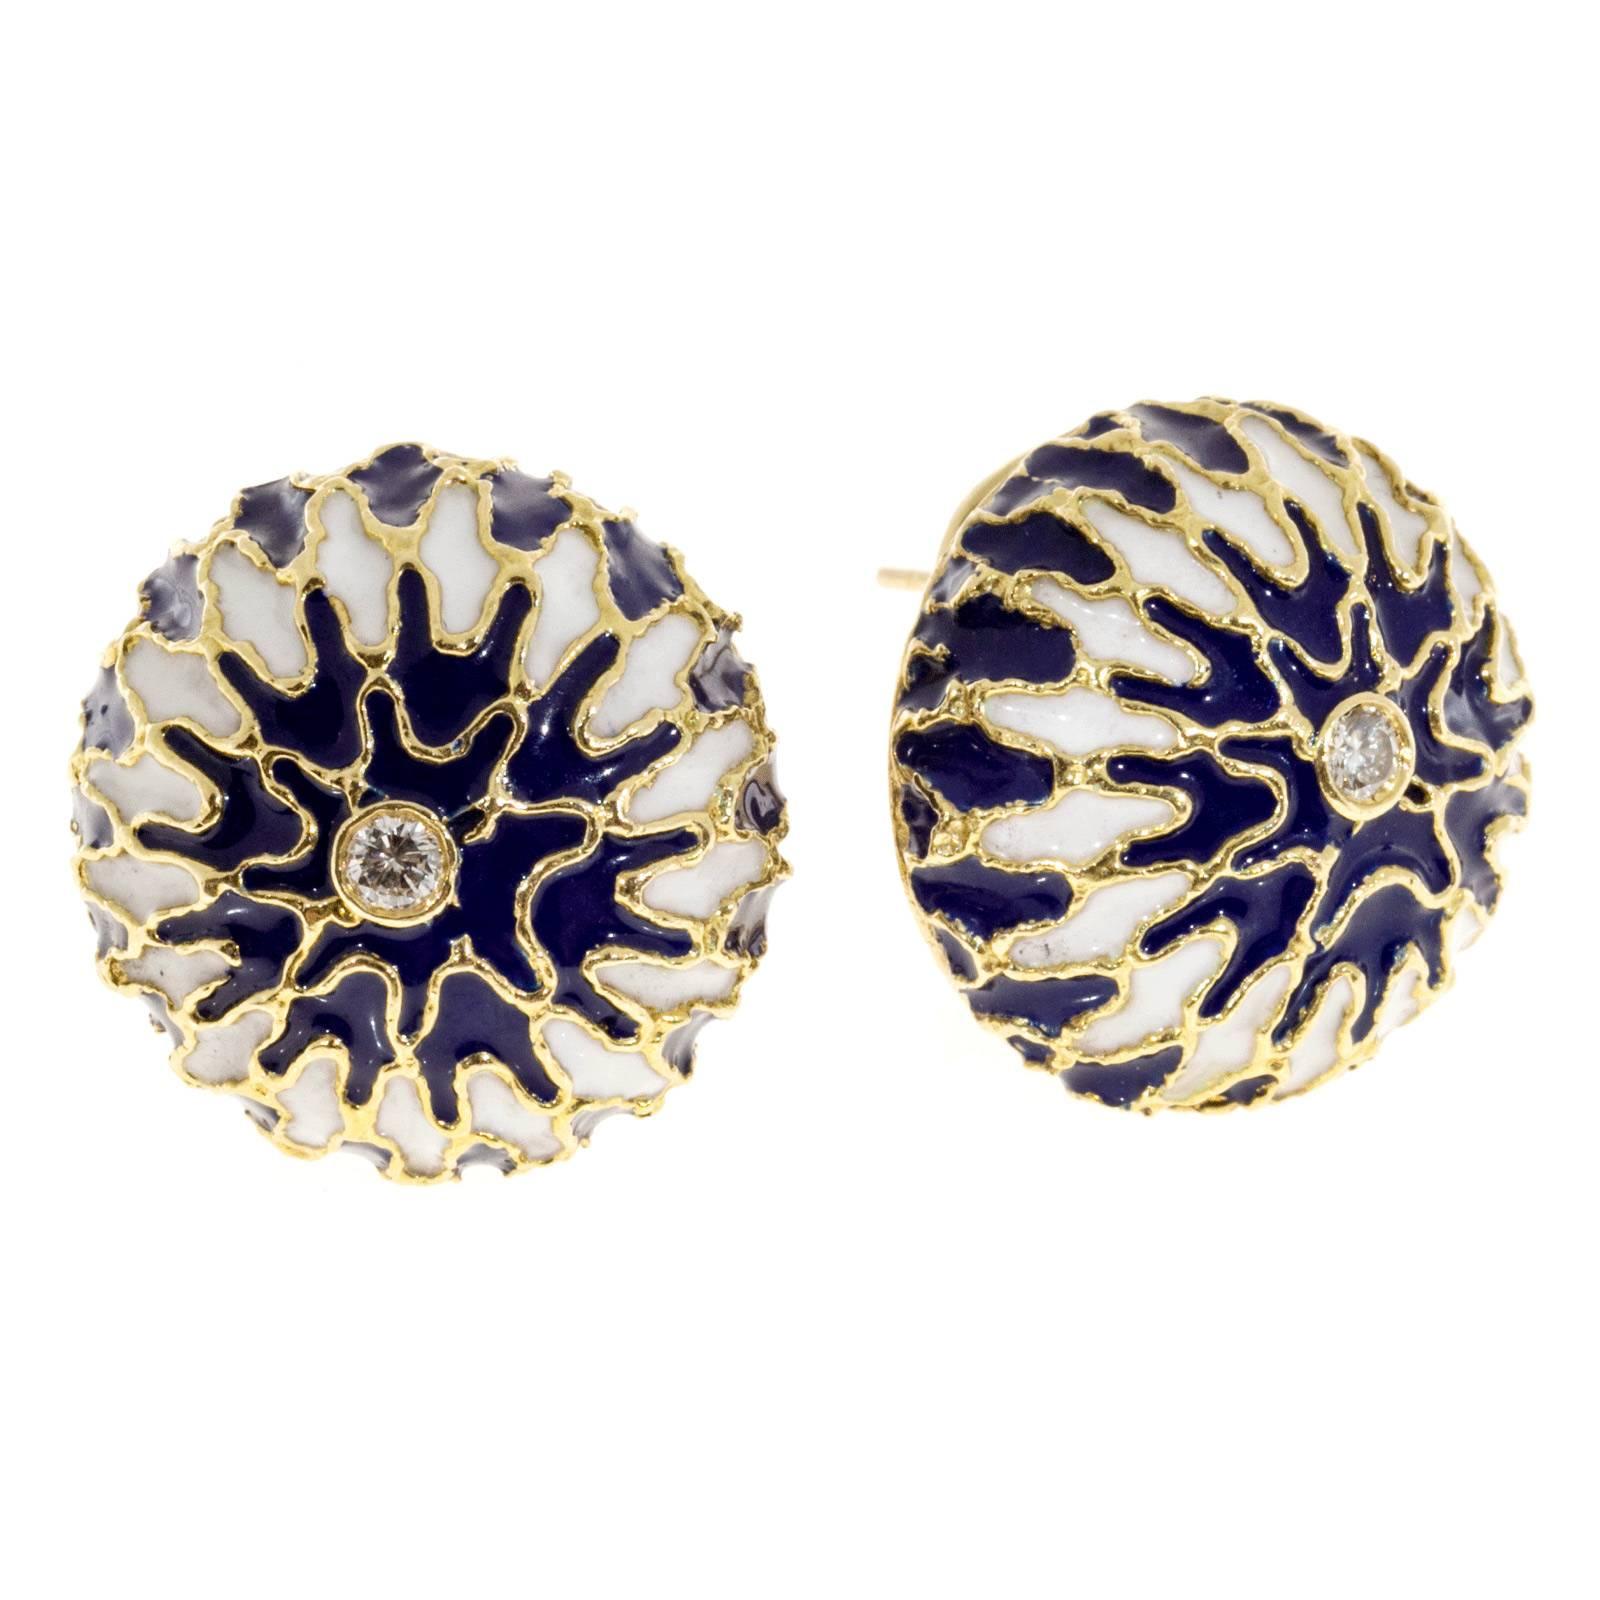 1950's high domed diamond and enamel earrings. 18k yellow gold with blue and white enamel. 2 round center diamonds. Clip & post style.

2 round diamonds, approx. total weight .24cts, H, VS2
18k yellow gold
Tested and stamped: 18k
28.8 grams
Top to